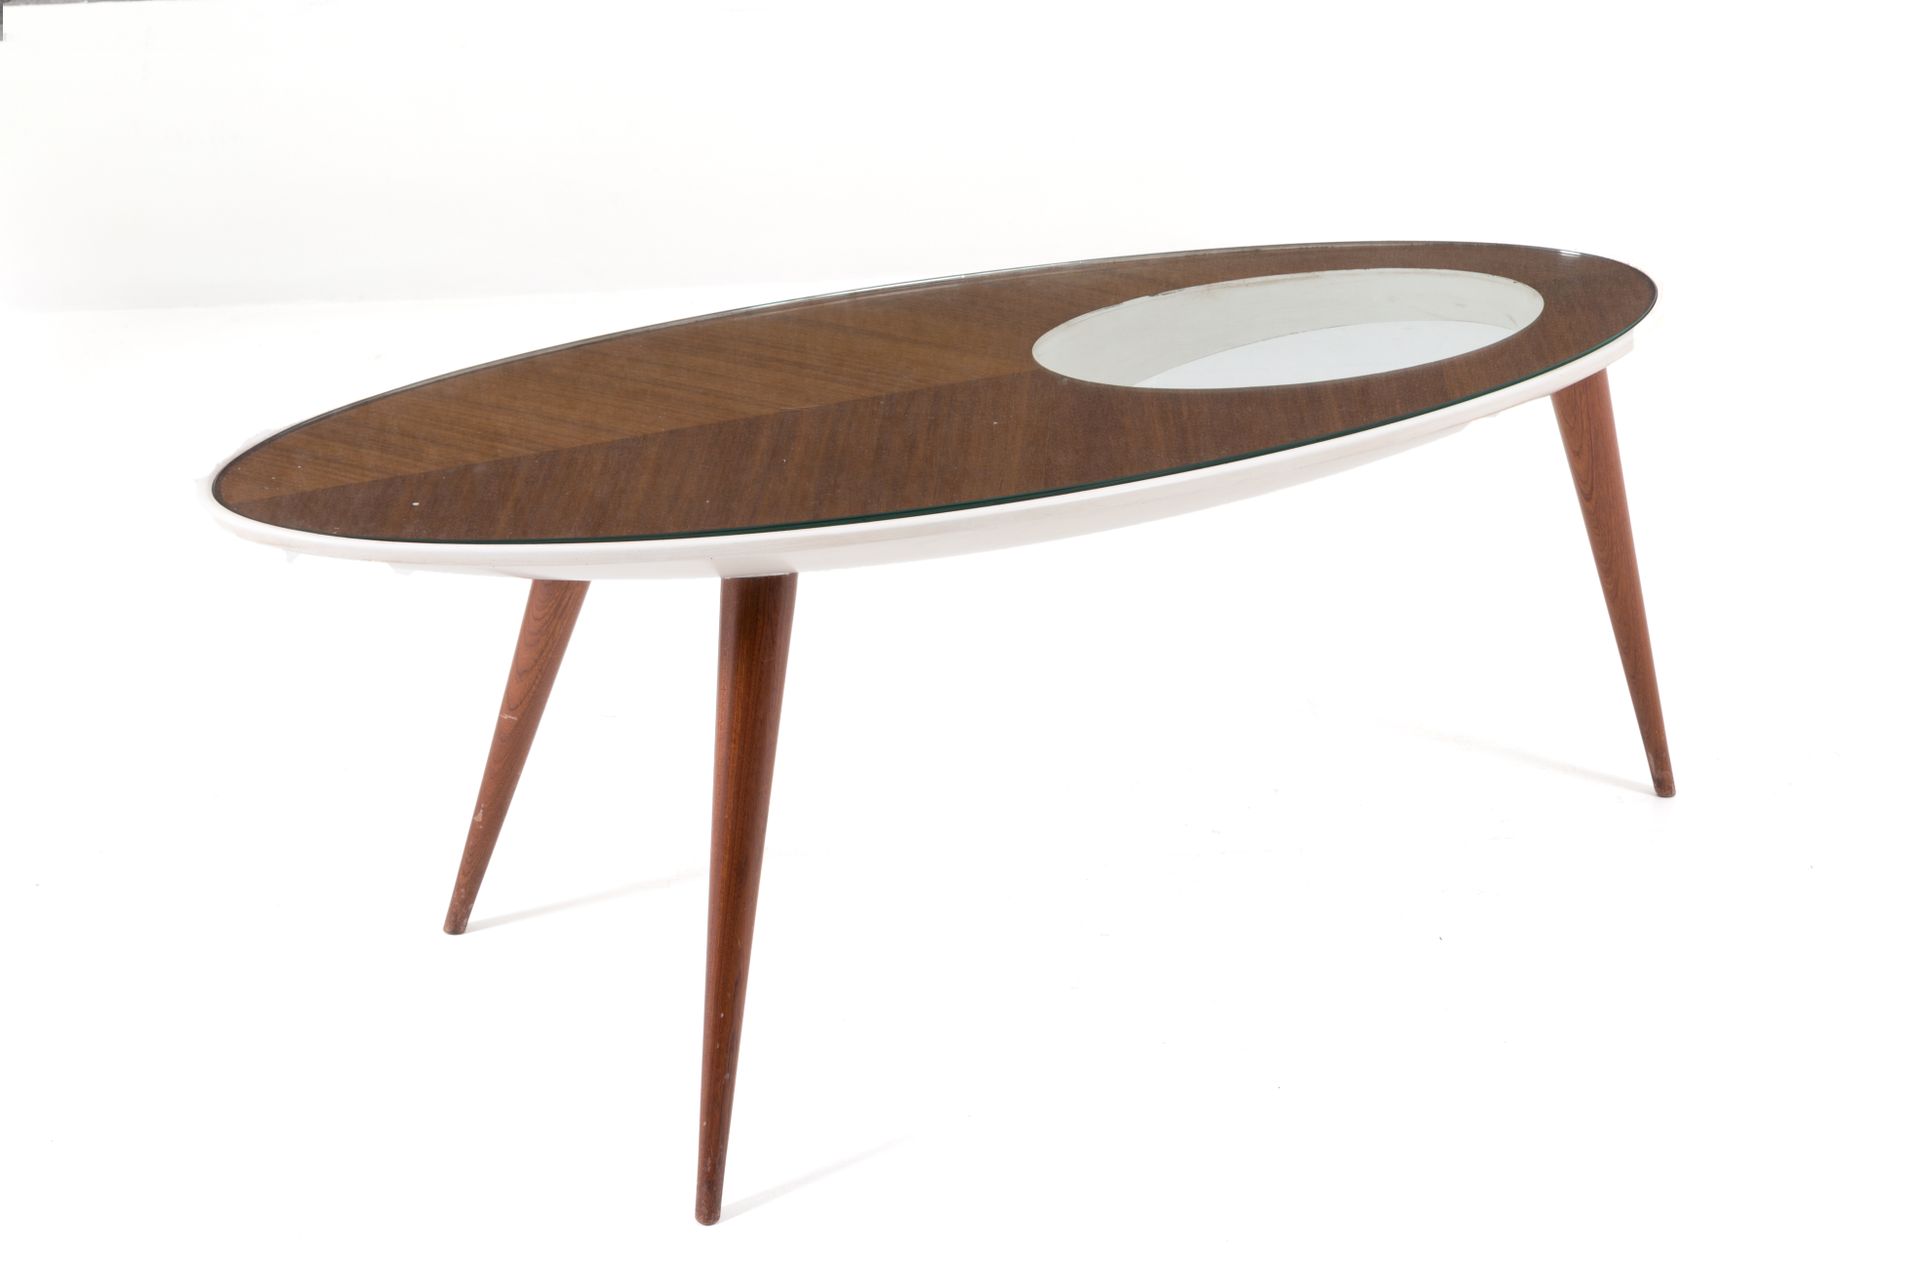 Wooden coffee table in the style of Gio Ponti 吉奥-庞蒂（米兰，1891-1979）风格的漆木和珍贵木材的小桌子。&hellip;